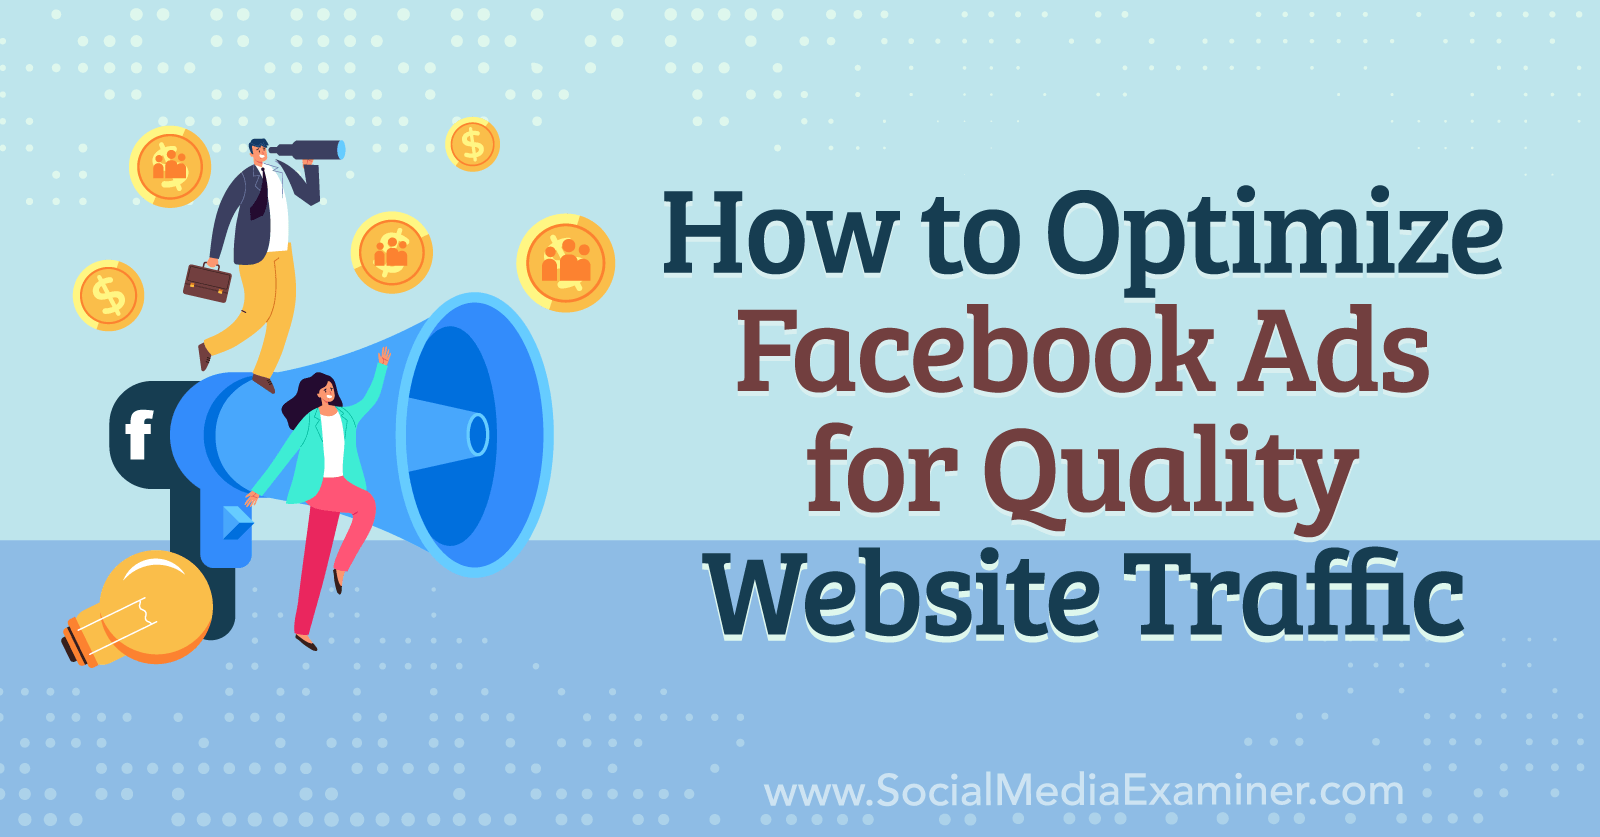 How to Optimize Facebook Ads for Quality Website Traffic-Social Media Examiner